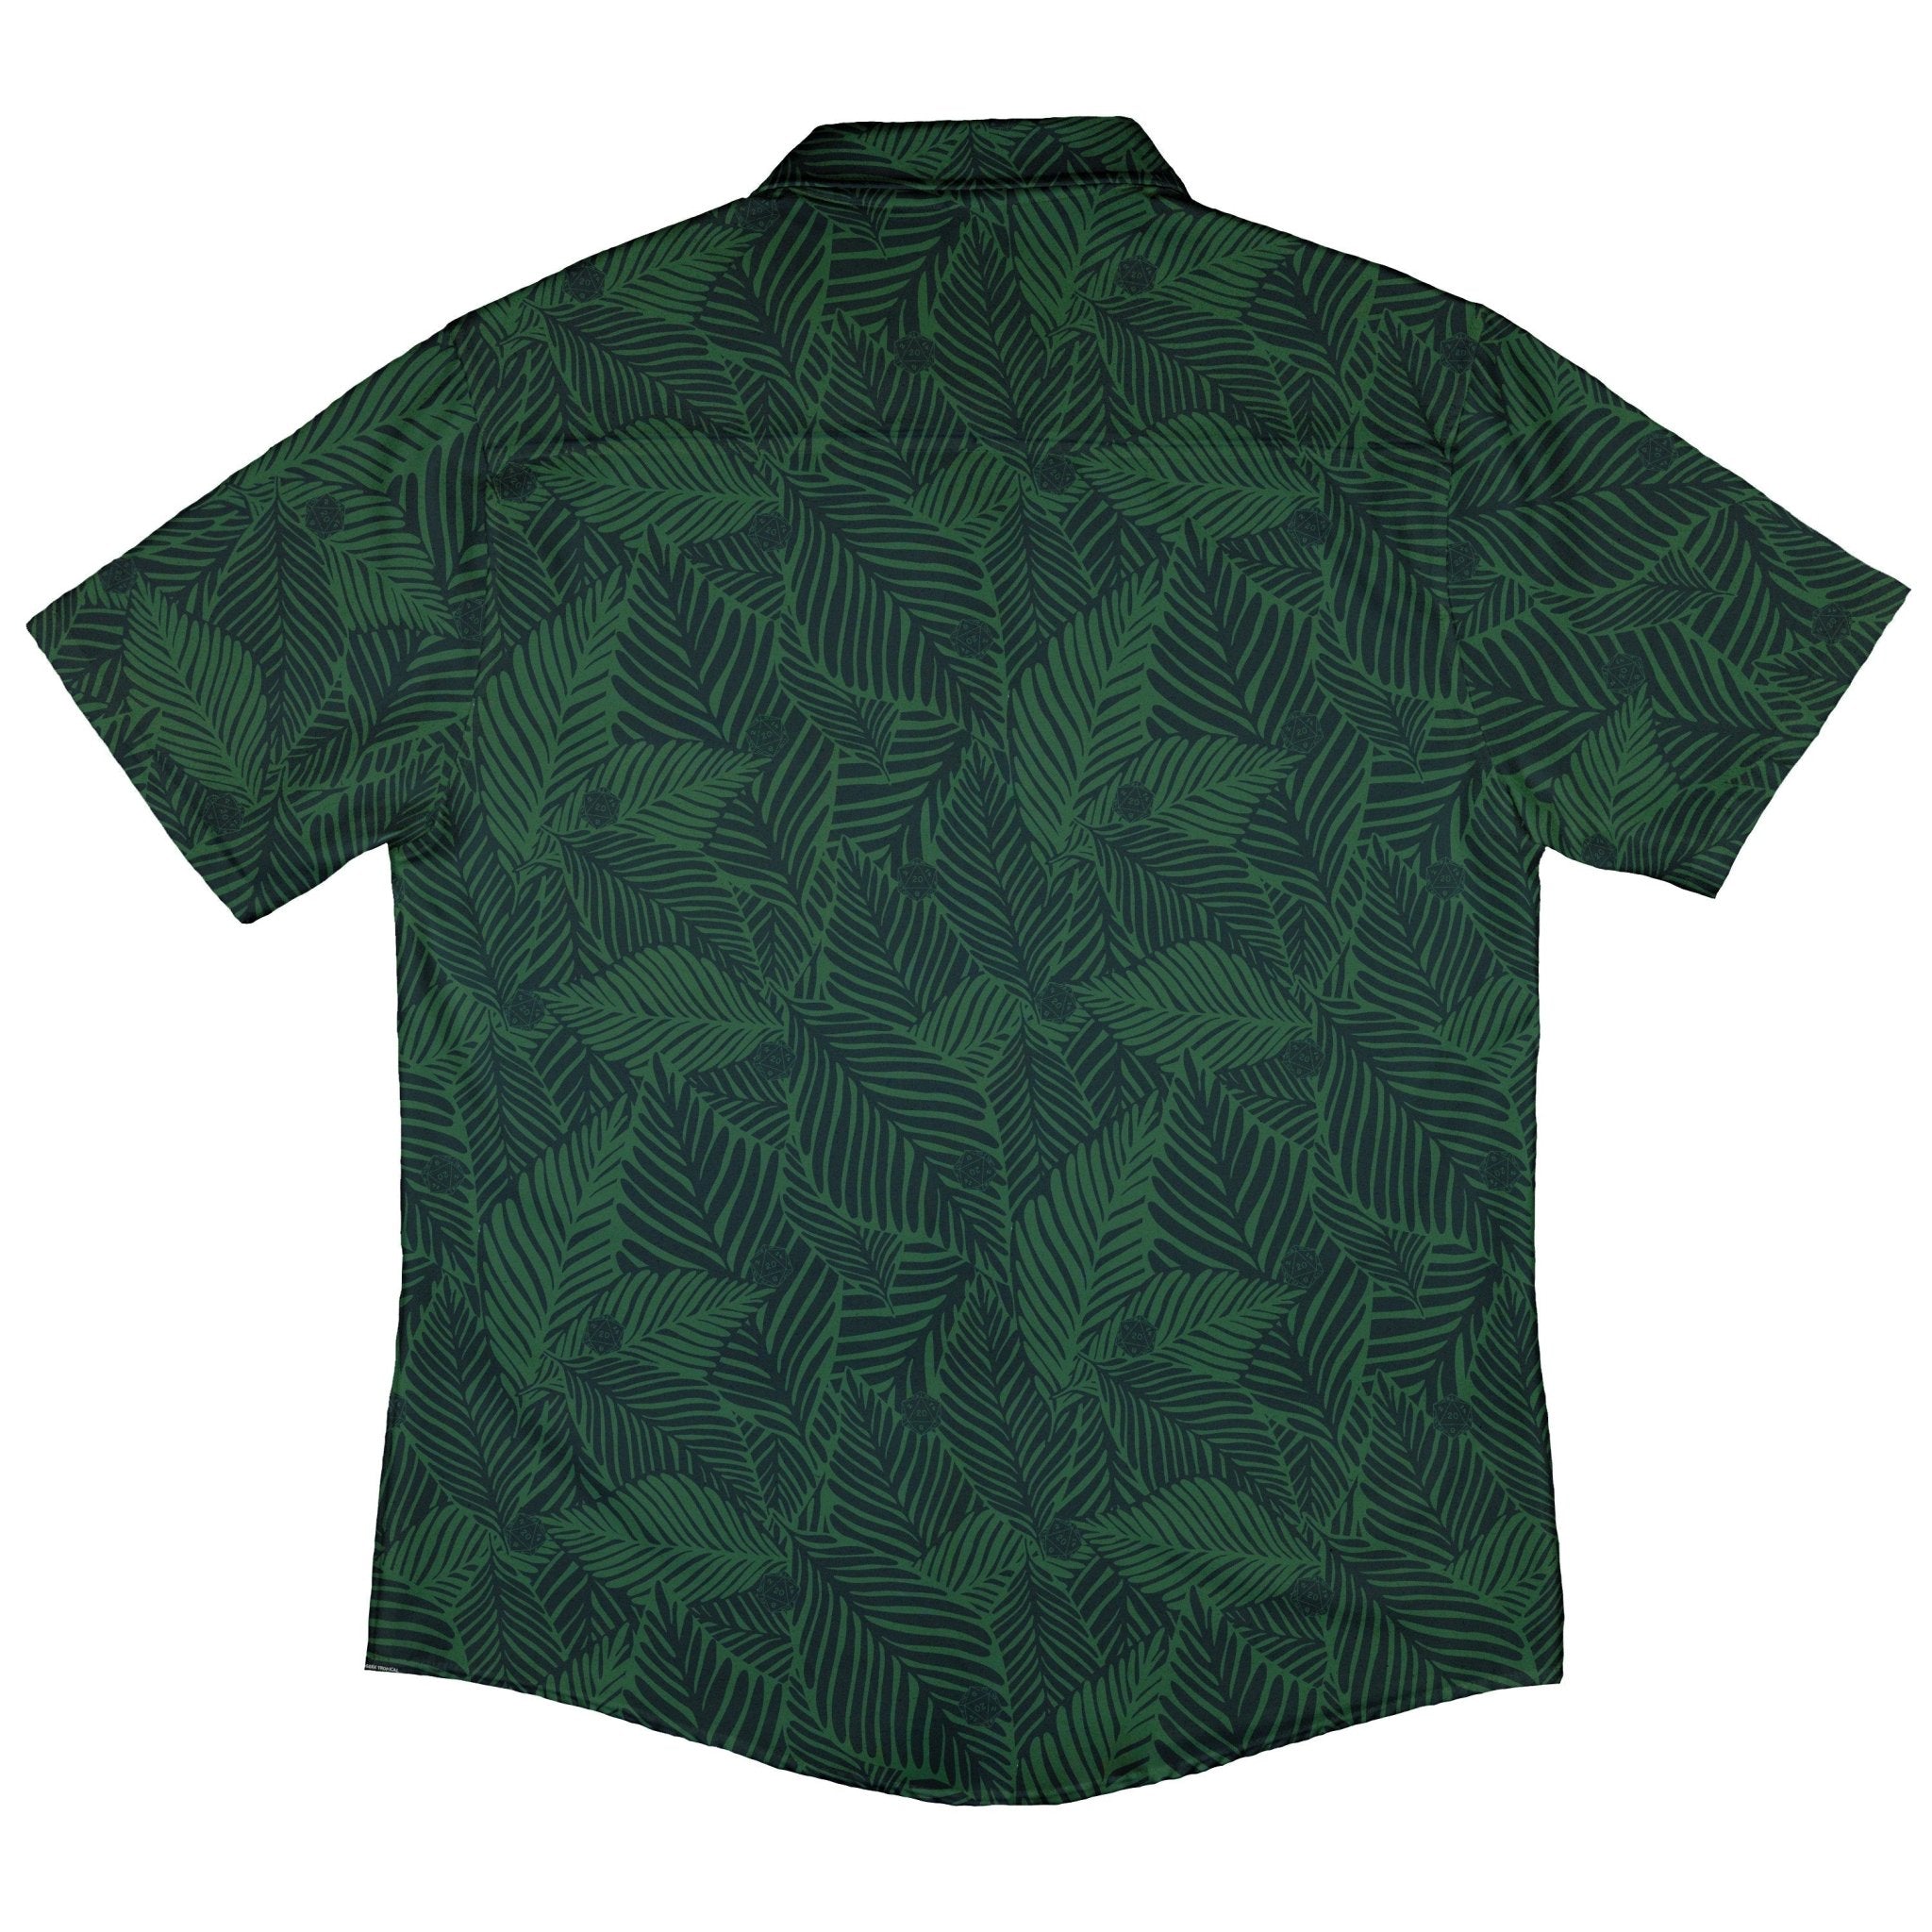 Tropical Dnd Dice Button Up Shirt - adult sizing - Design by Dunking Toast - dnd & rpg print